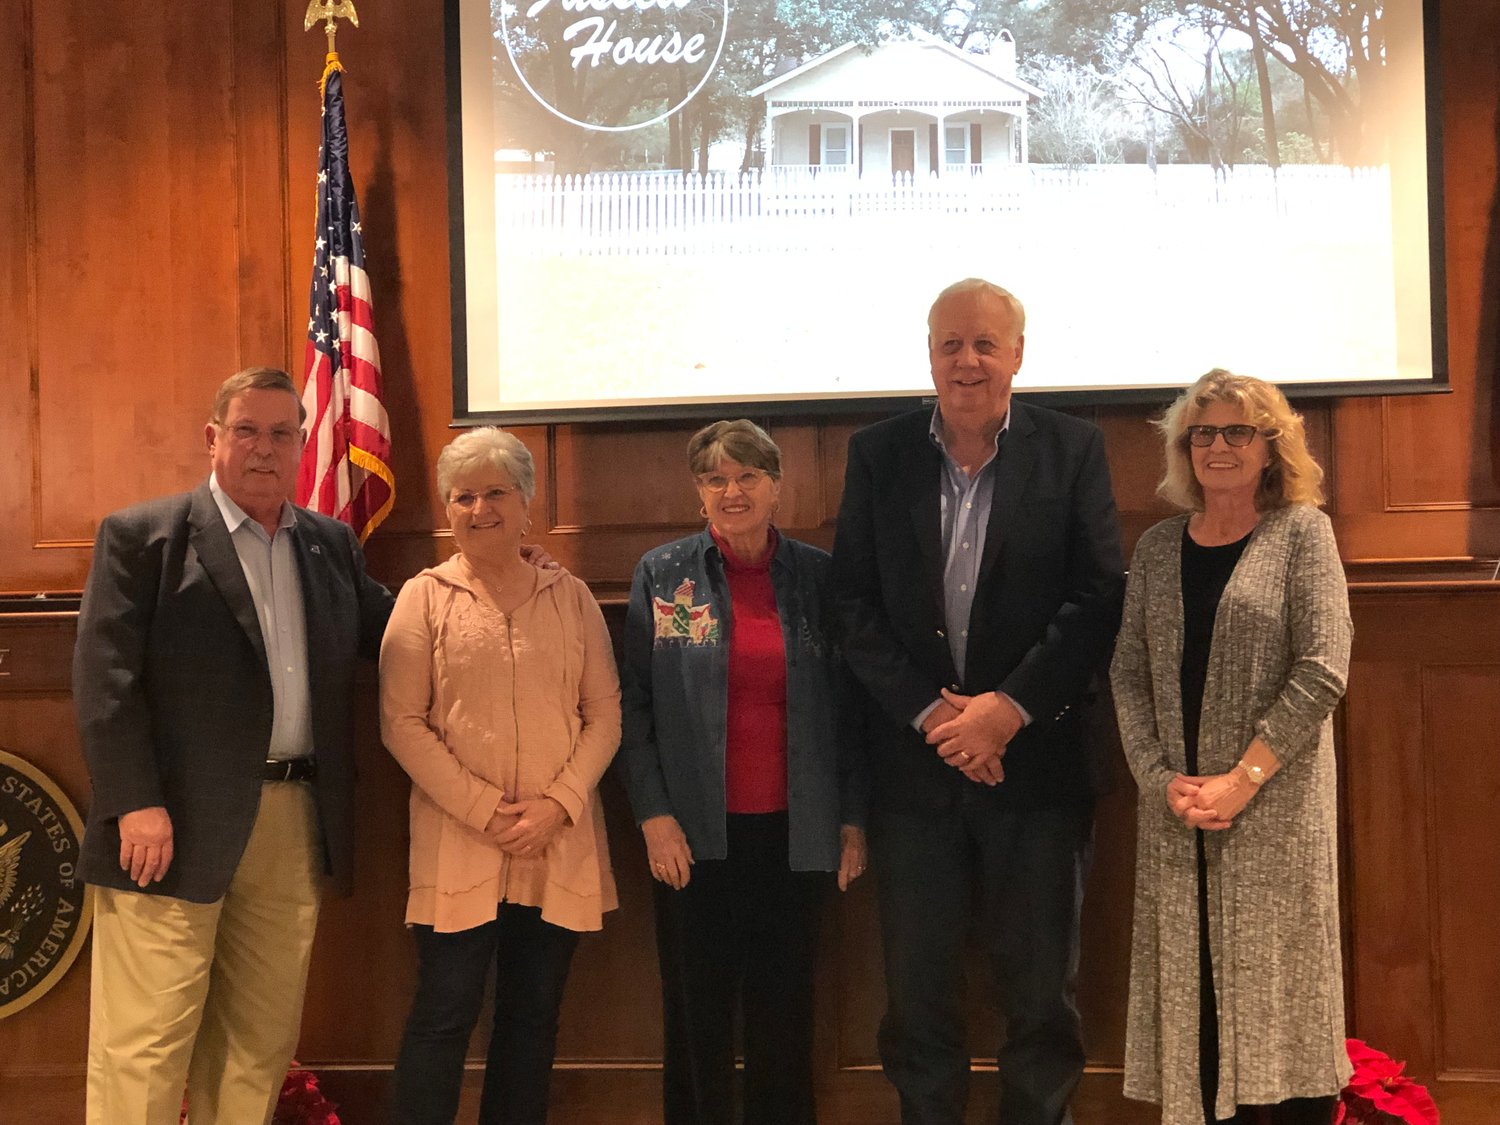 Members of the Fussell family were on hand Monday at City Hall to hear the city’s plans for the historic Fussell House going forward. Pictured are former Mayor Hank Schmidt, Sandy Fussell Schmidt, Marsha Fussell Wiesner, Roy Wiesner, and Belva Fussell.